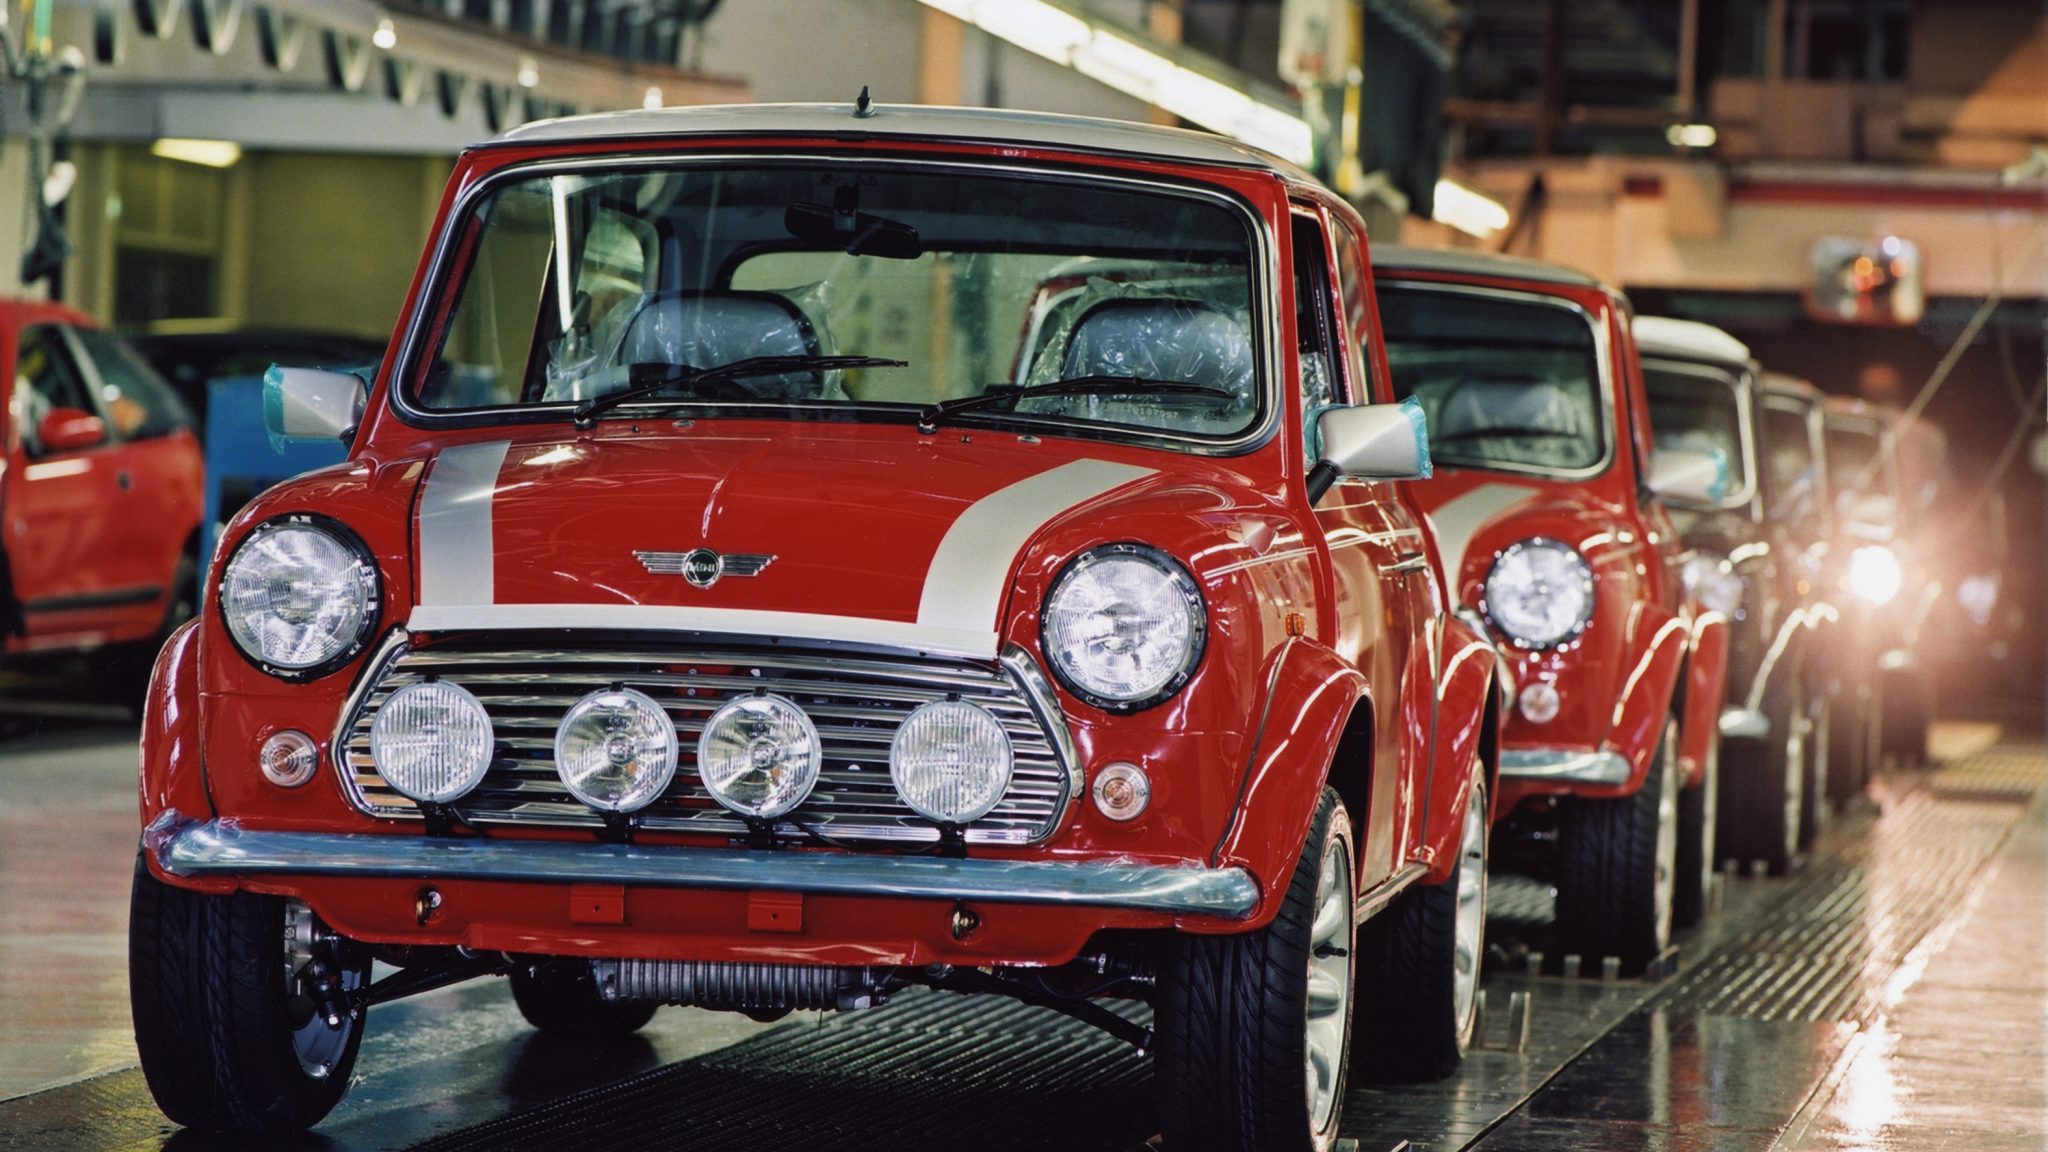 Red Mini Cooper 'Classics' on the production line.